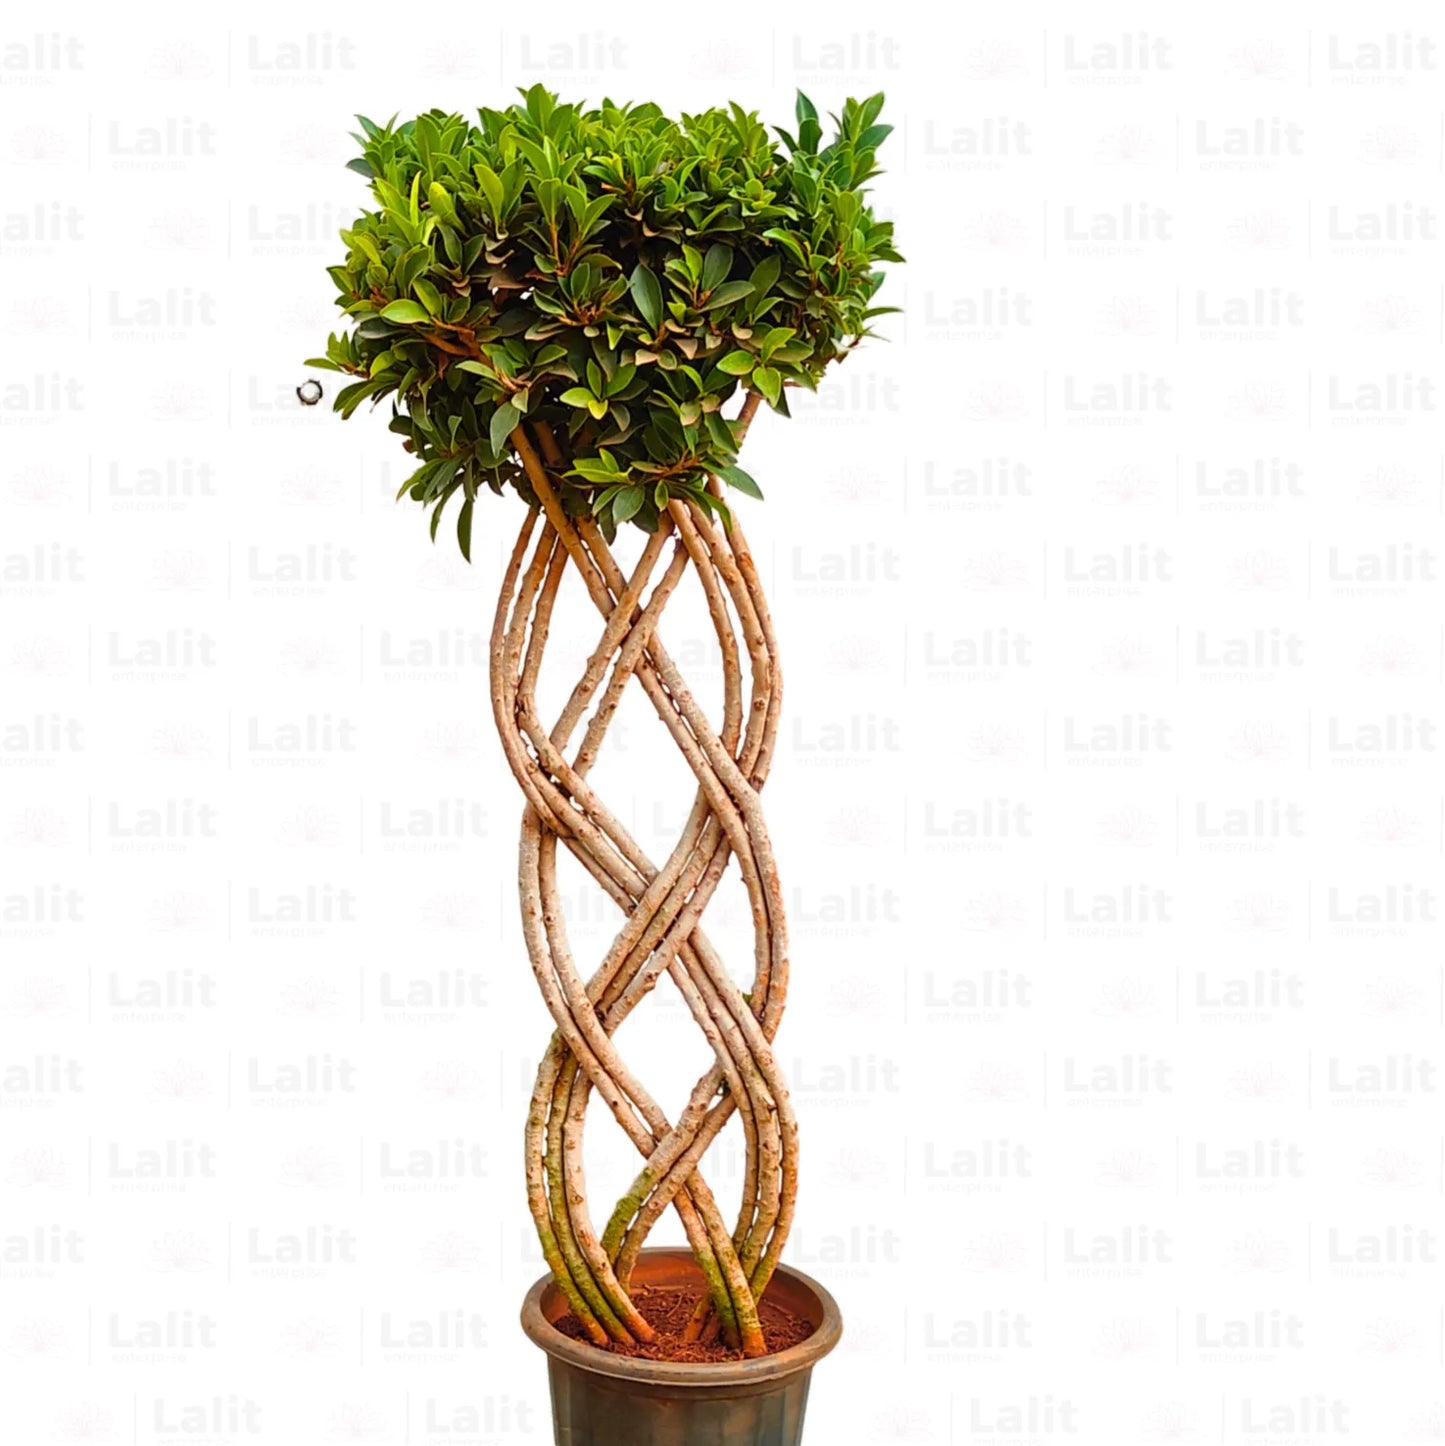 Buy Grided Ficus "2 Layer" - Plant Online at Lalitenterprise